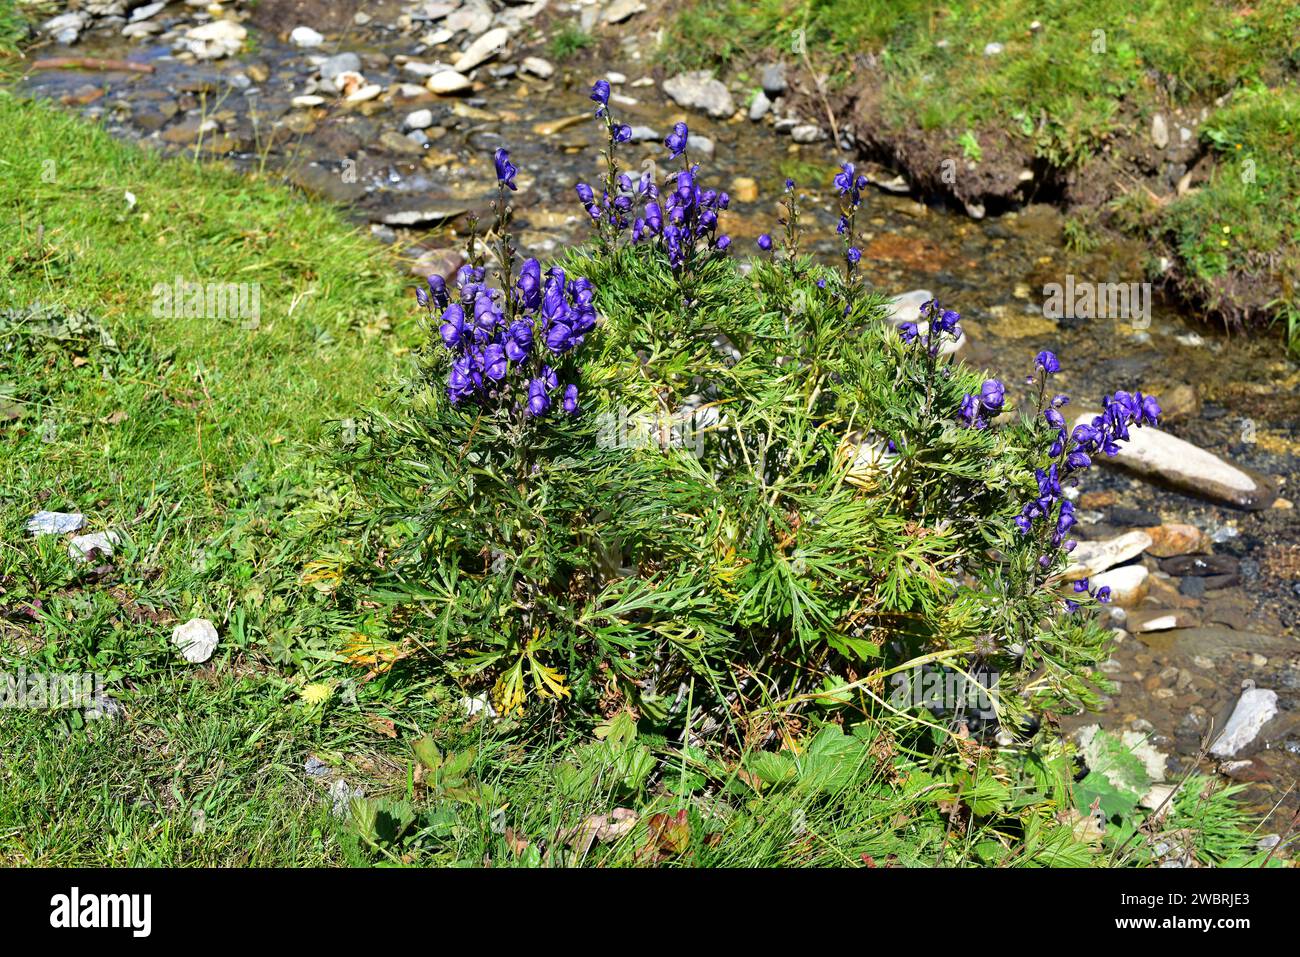 Aconite or monk's hood (Aconitum napellus) is a poisonous perennial herb endemic to western Europe. This photo was taken in Montgarri, Lleida province Stock Photo